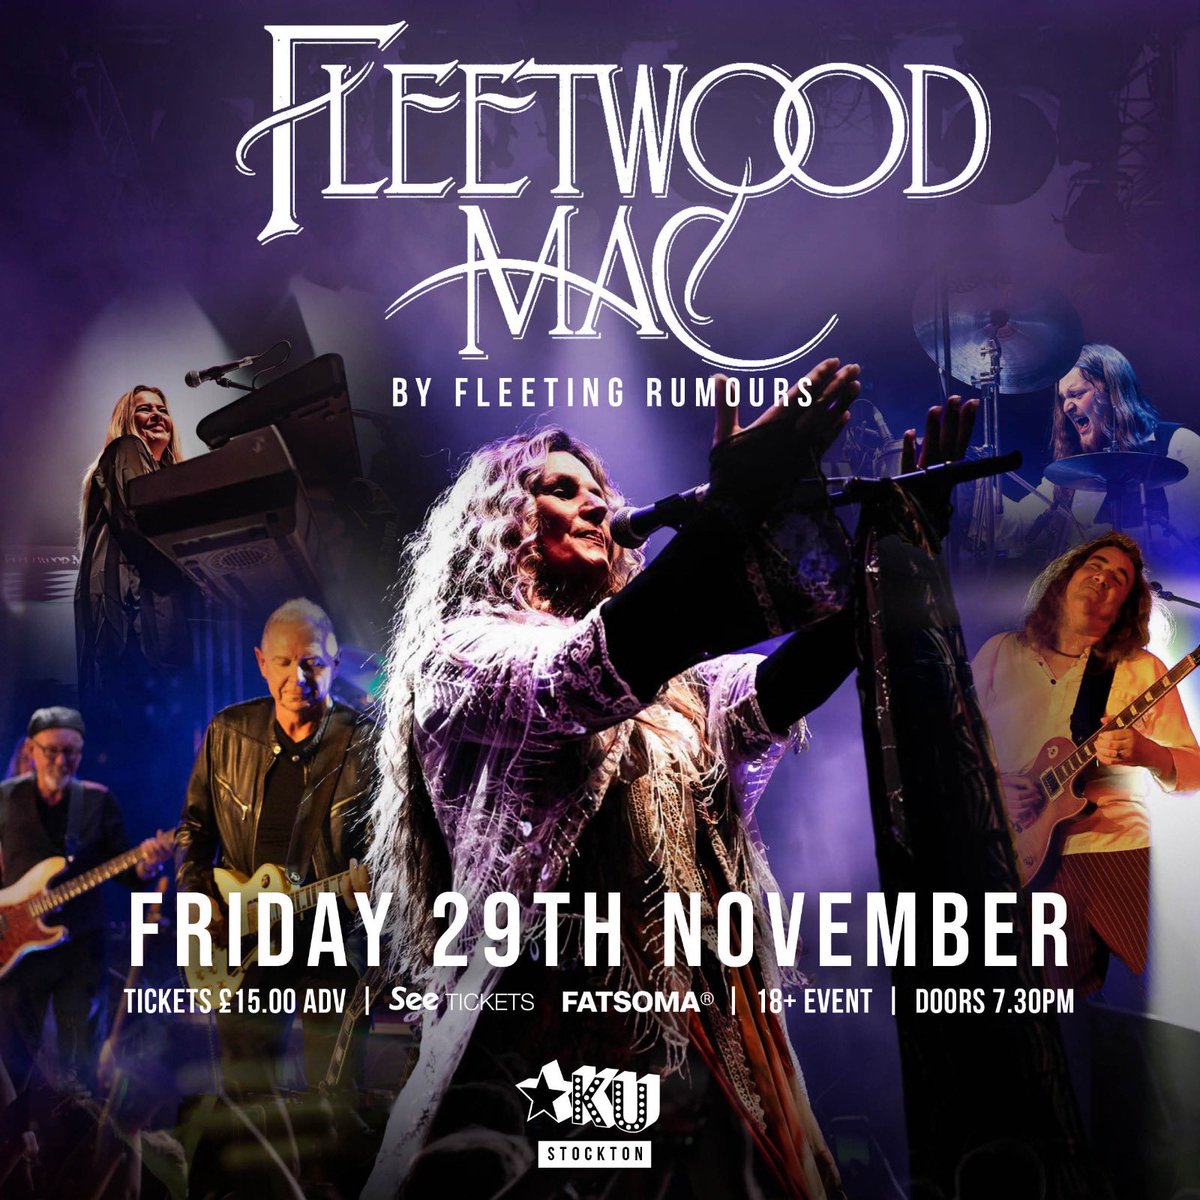 Looking ahead to the end of the year, we’ll be starting the festive period off in style with Fleeting Rumours 🙌 Catch this top tribute to the legendary Fleetwood Mac - Friday 29th November 🗓️ 🎫 fatsoma.com/e/u1bfnxao/la/…